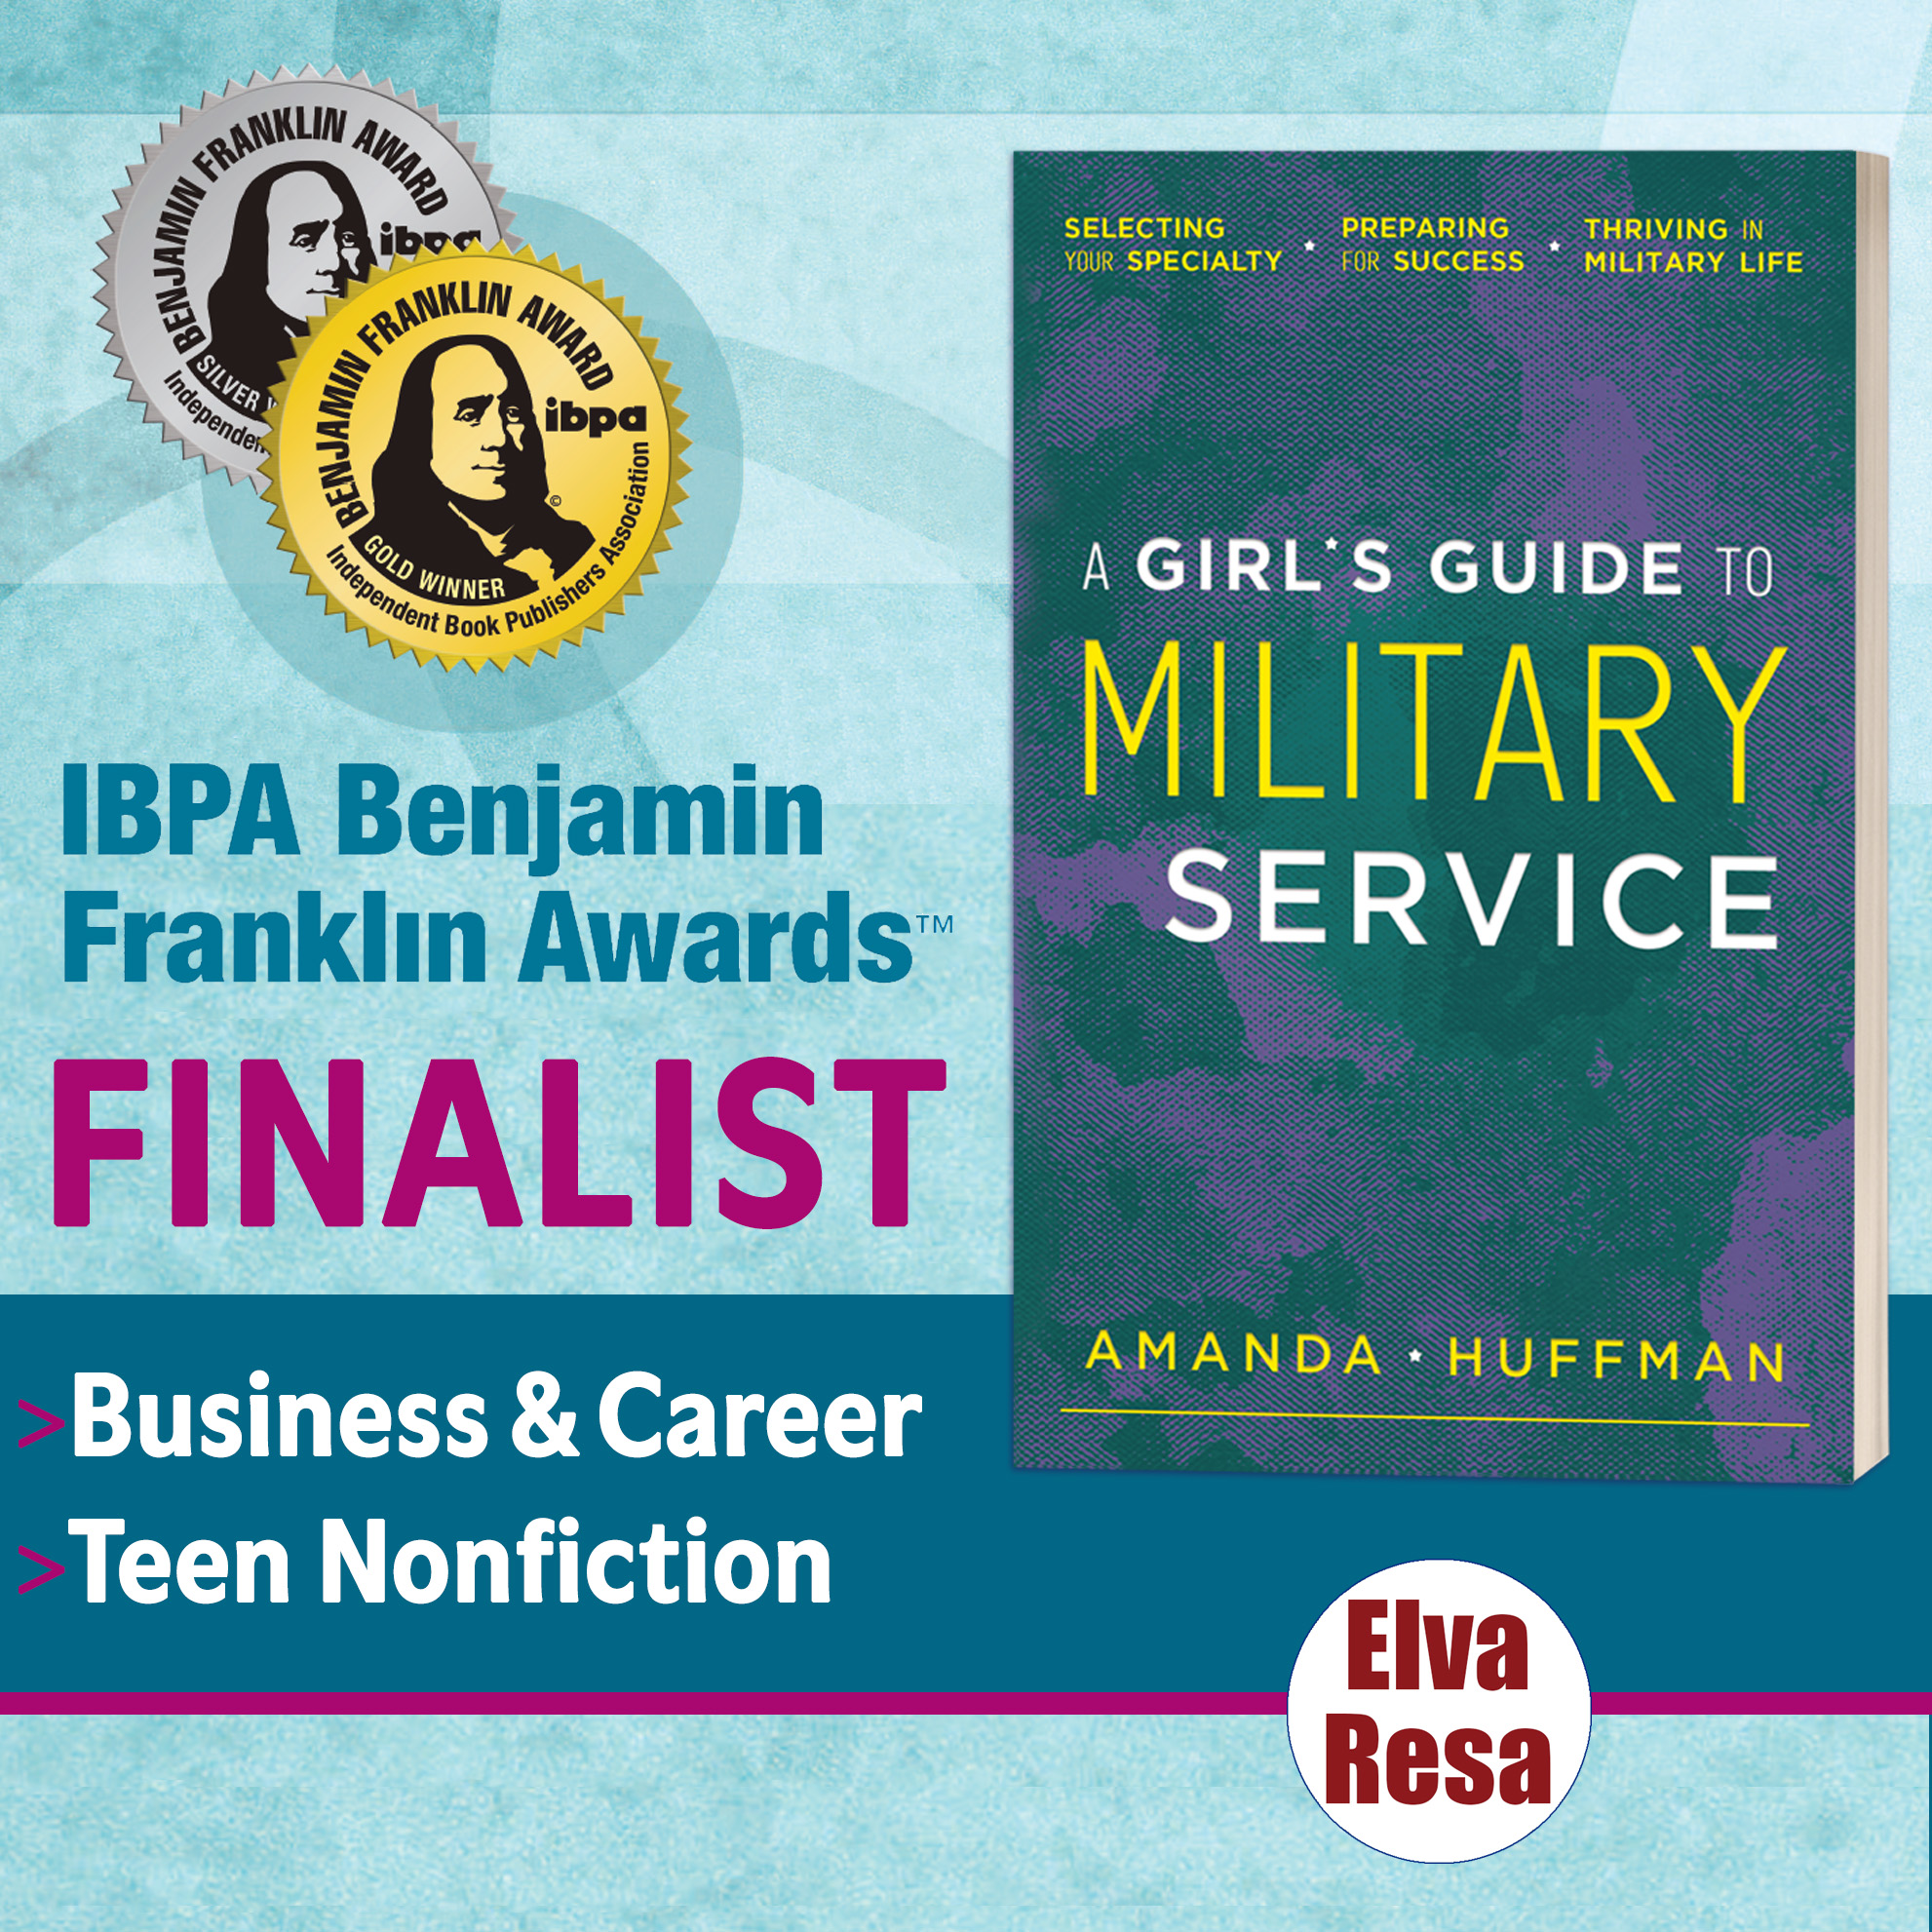 A Girl’s Guide to Military Service: Selecting Your Specialty, Preparing for Success, Thriving in Military Life by Amanda Huffman, published by Elva Resa Publishing, has been named a finalist in the 35th annual IBPA Benjamin Franklin Award™ program in two categories: Business & Career and Teen Nonfiction.